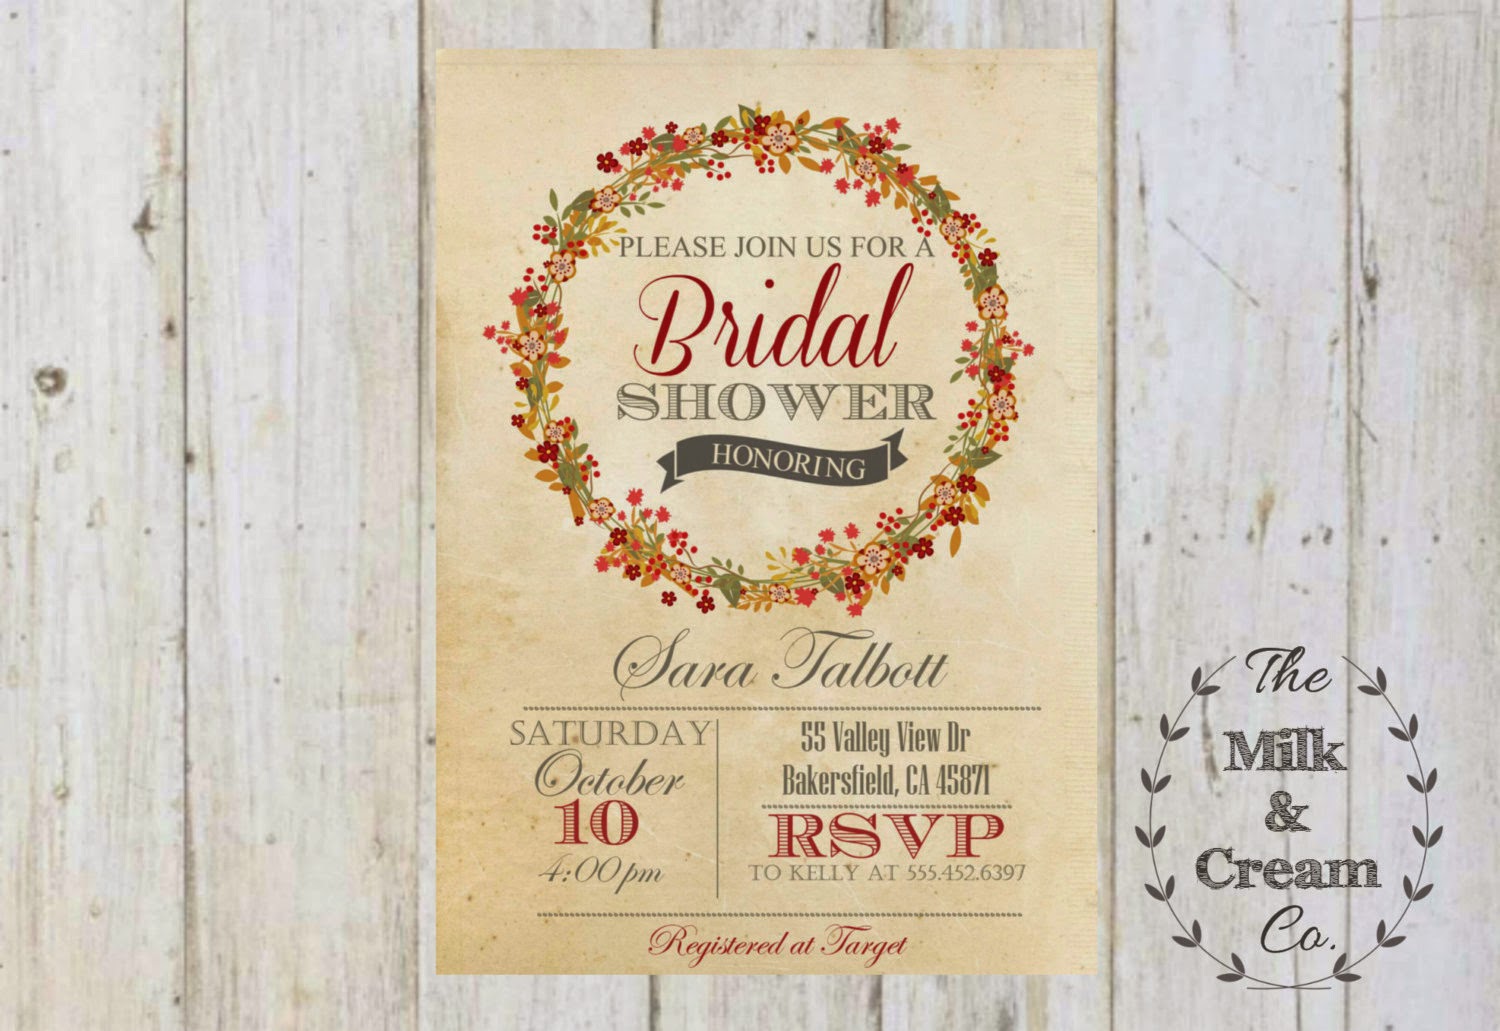 https://www.etsy.com/listing/207009590/rustic-fall-wreath-bridal-shower-invite?ref=shop_home_active_18